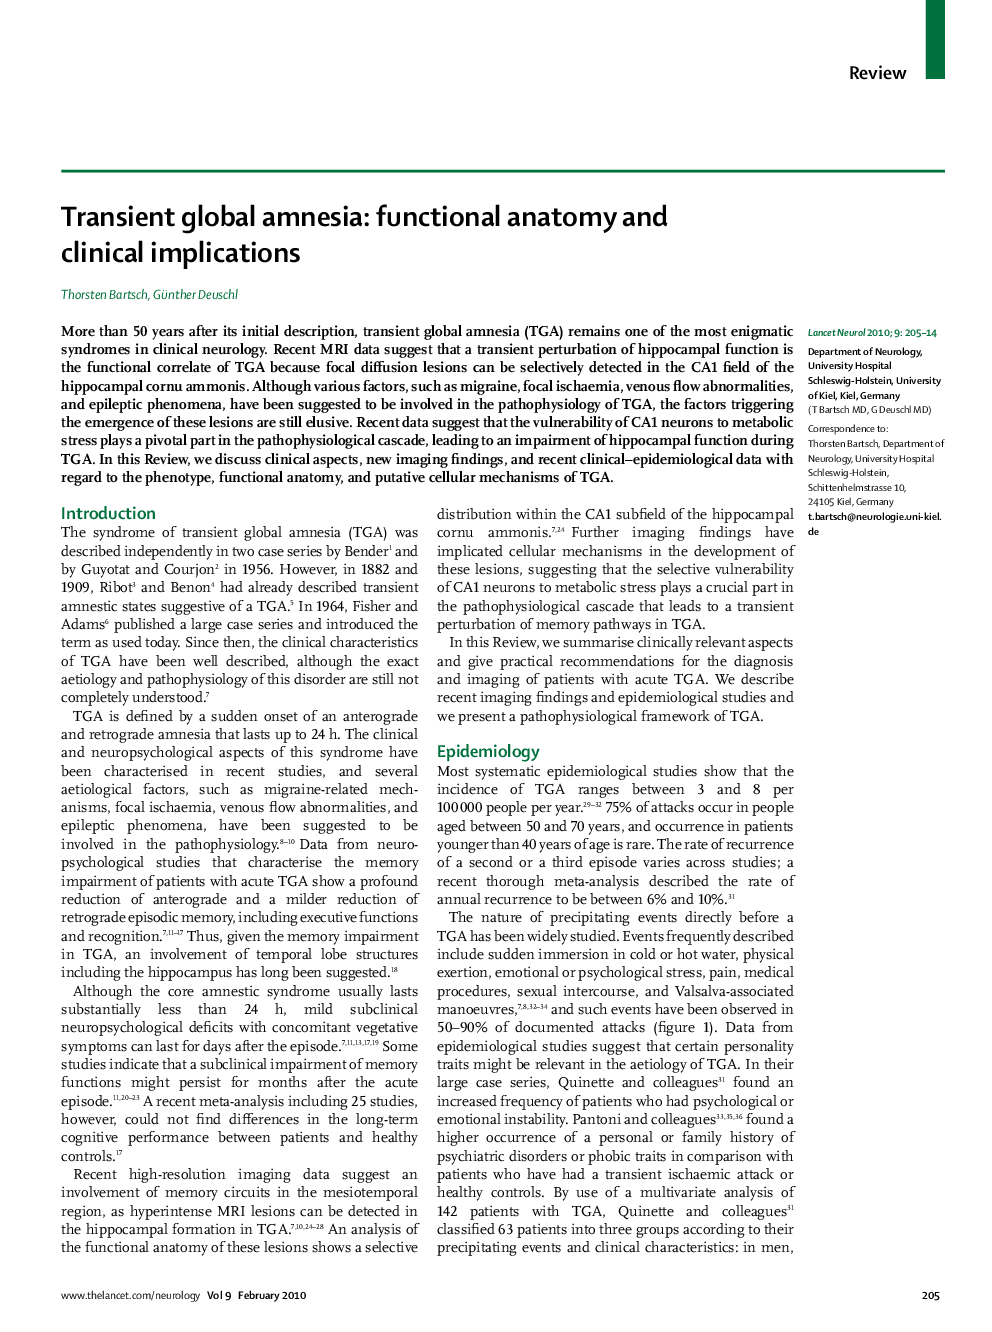 Transient global amnesia: functional anatomy and clinical implications